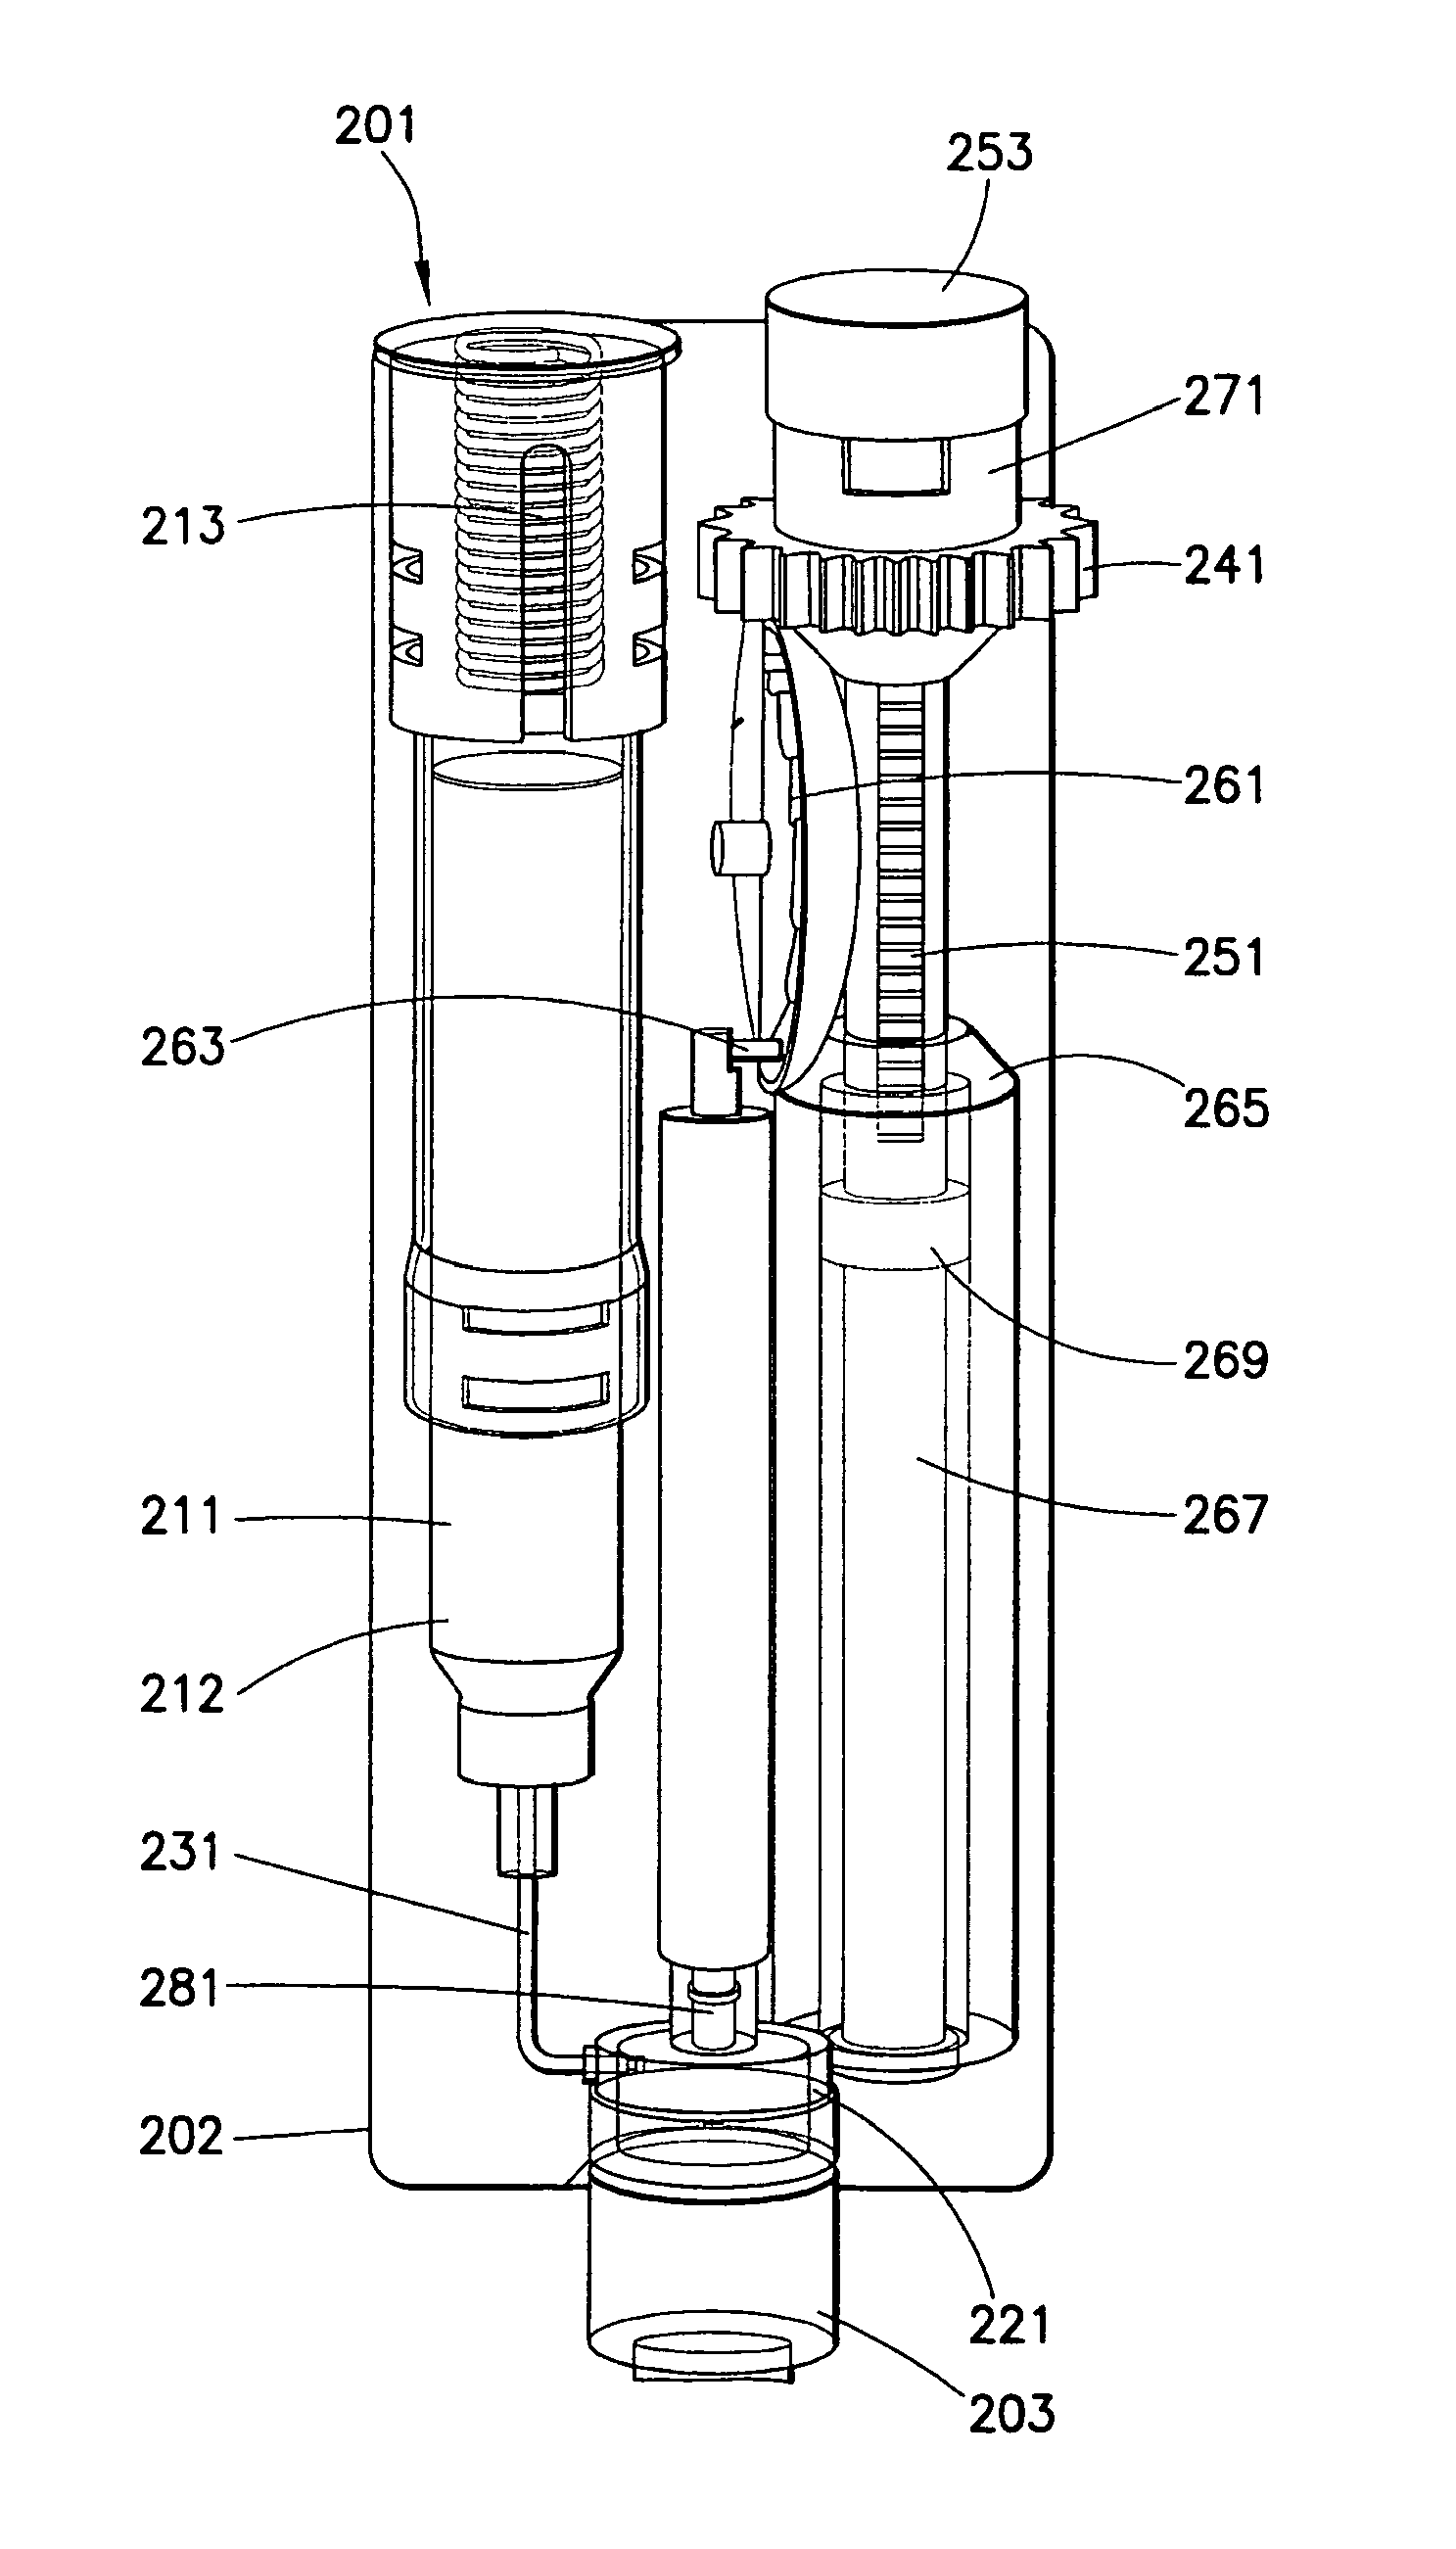 Multi-stroke delivery pumping mechanism for a drug delivery device for high pressure injections